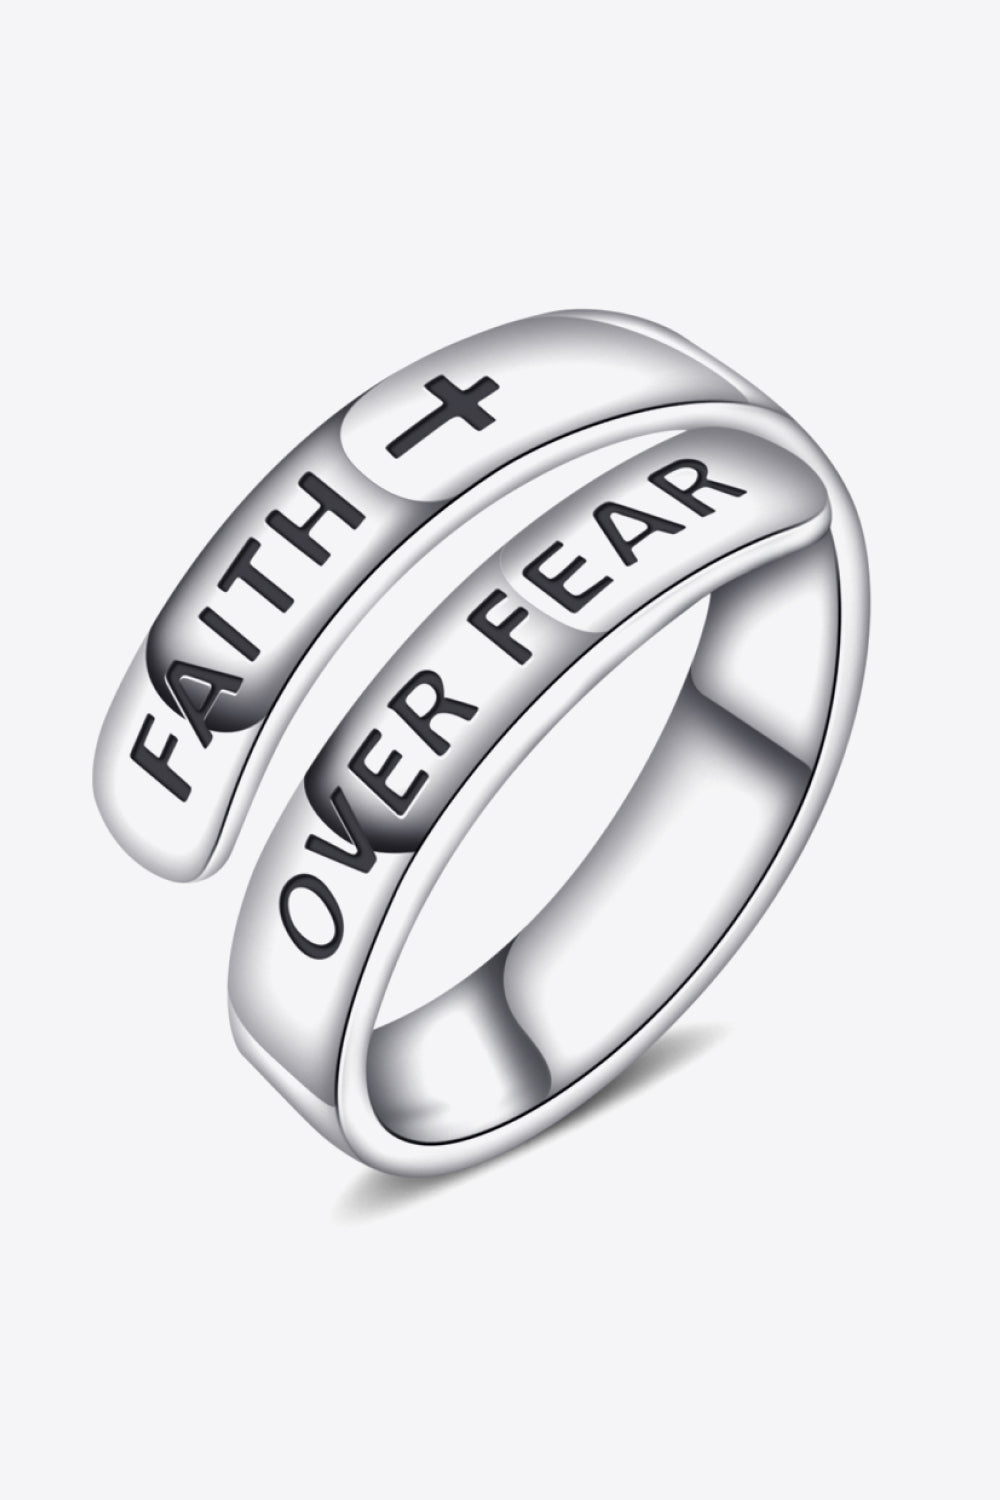 Faith Over Fear Wrap Ring in Sterling Silver